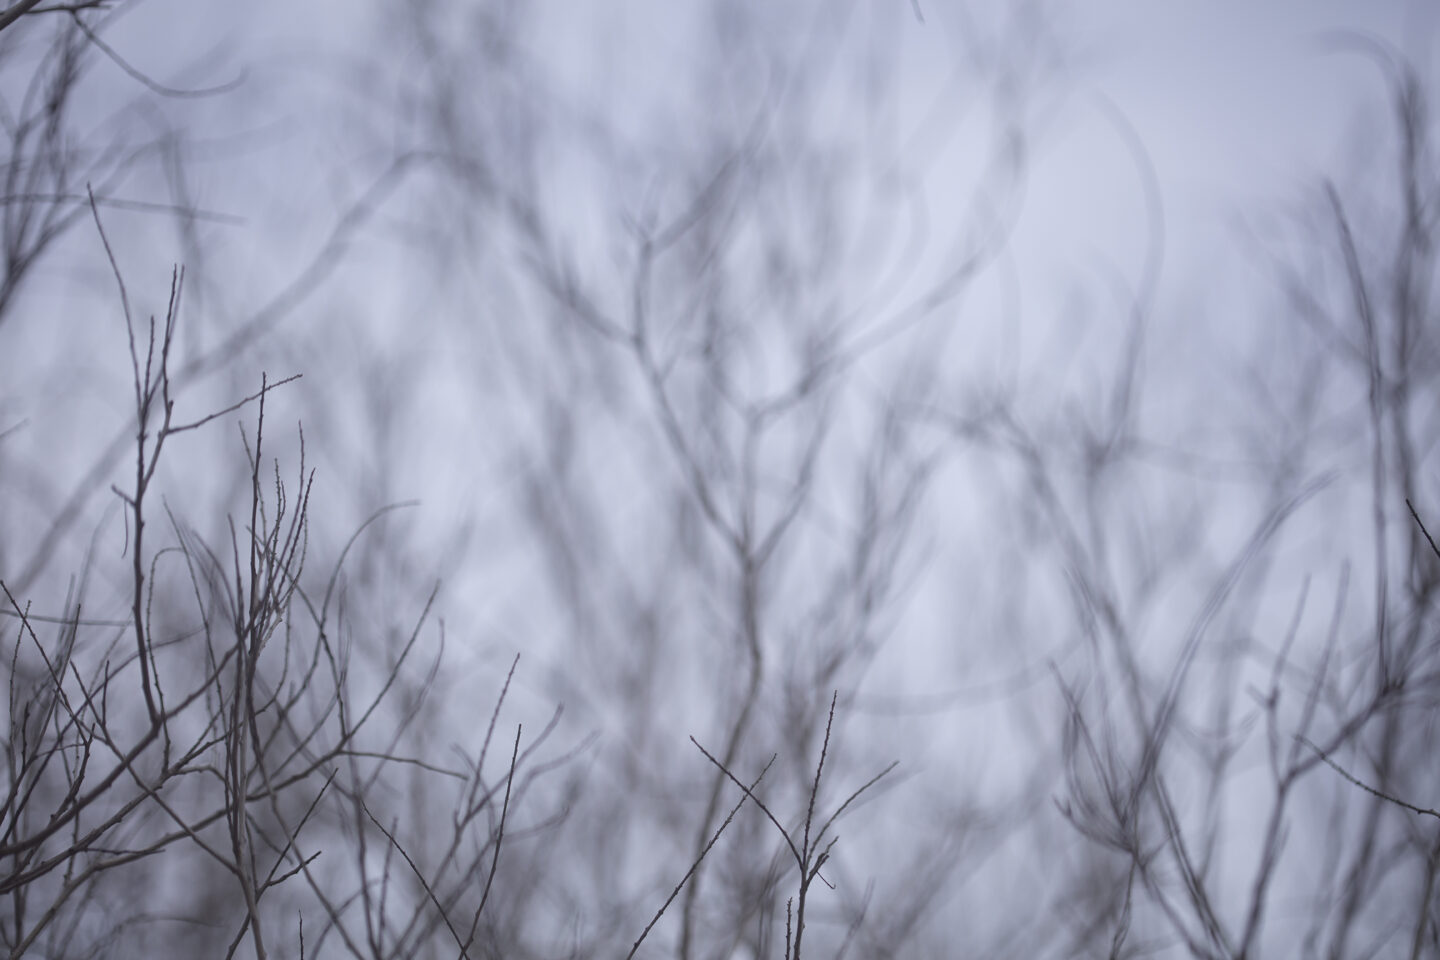 Bare branches against a flat sky, image by Carol Schiraldi of Carol's Little World